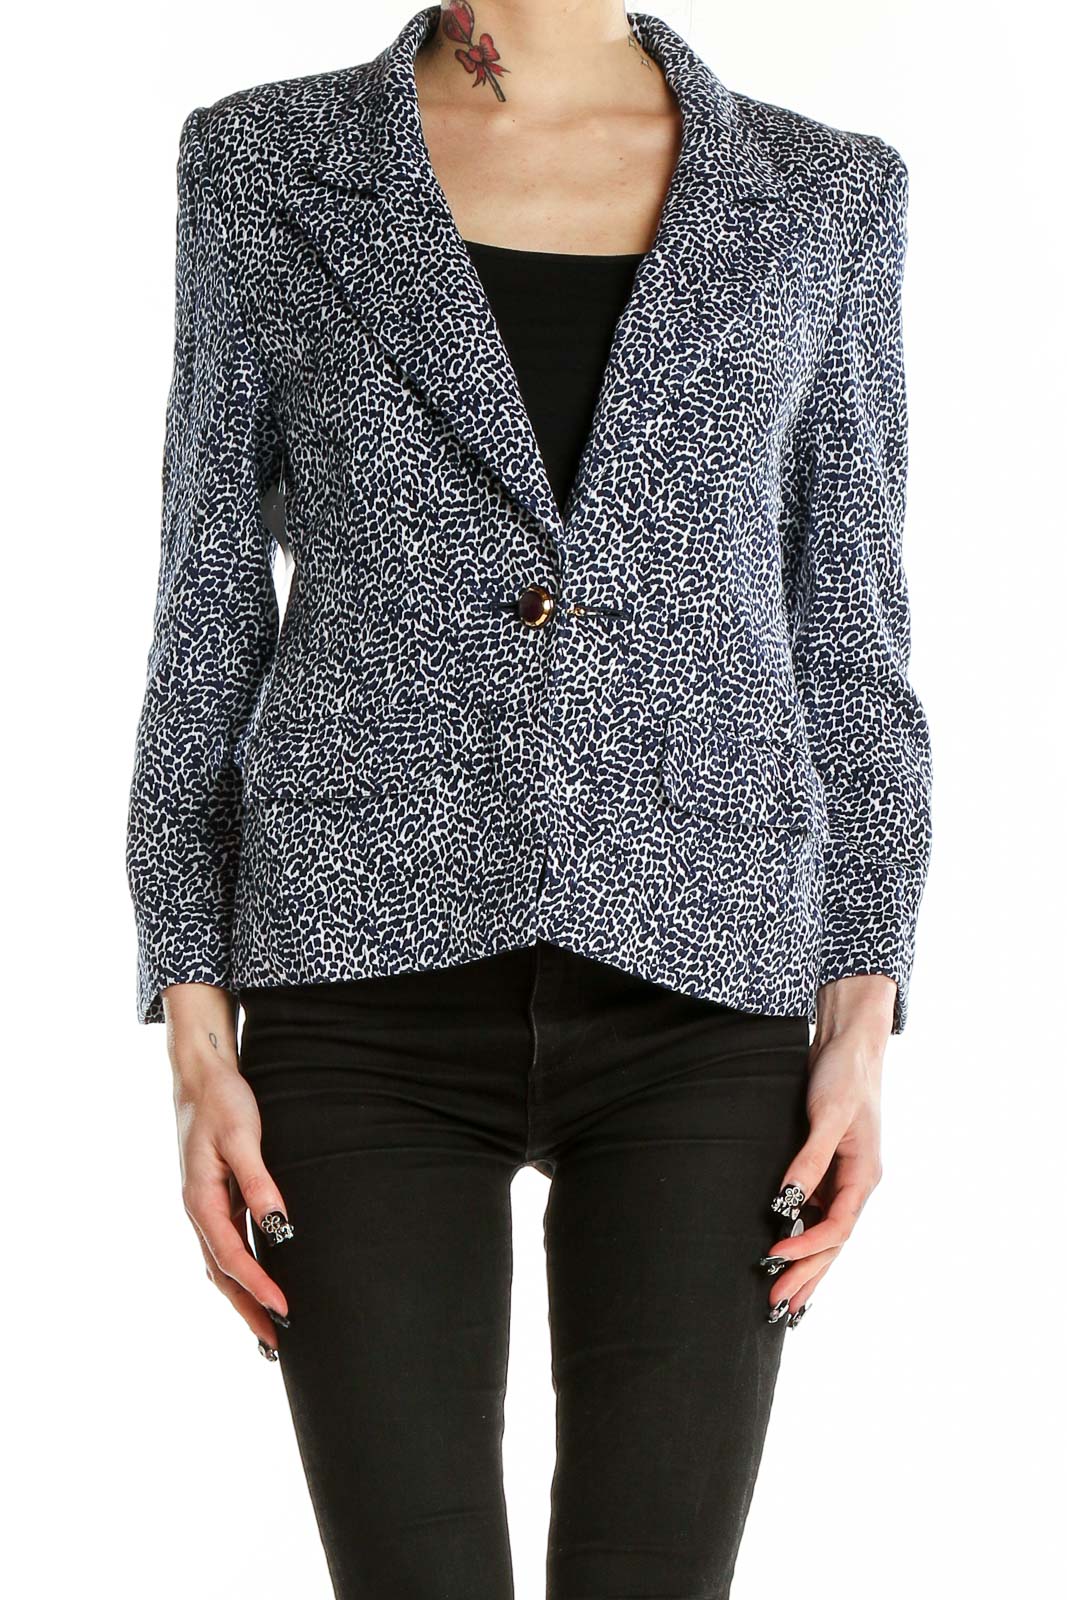 Blue White Single Breasted Blazer Front